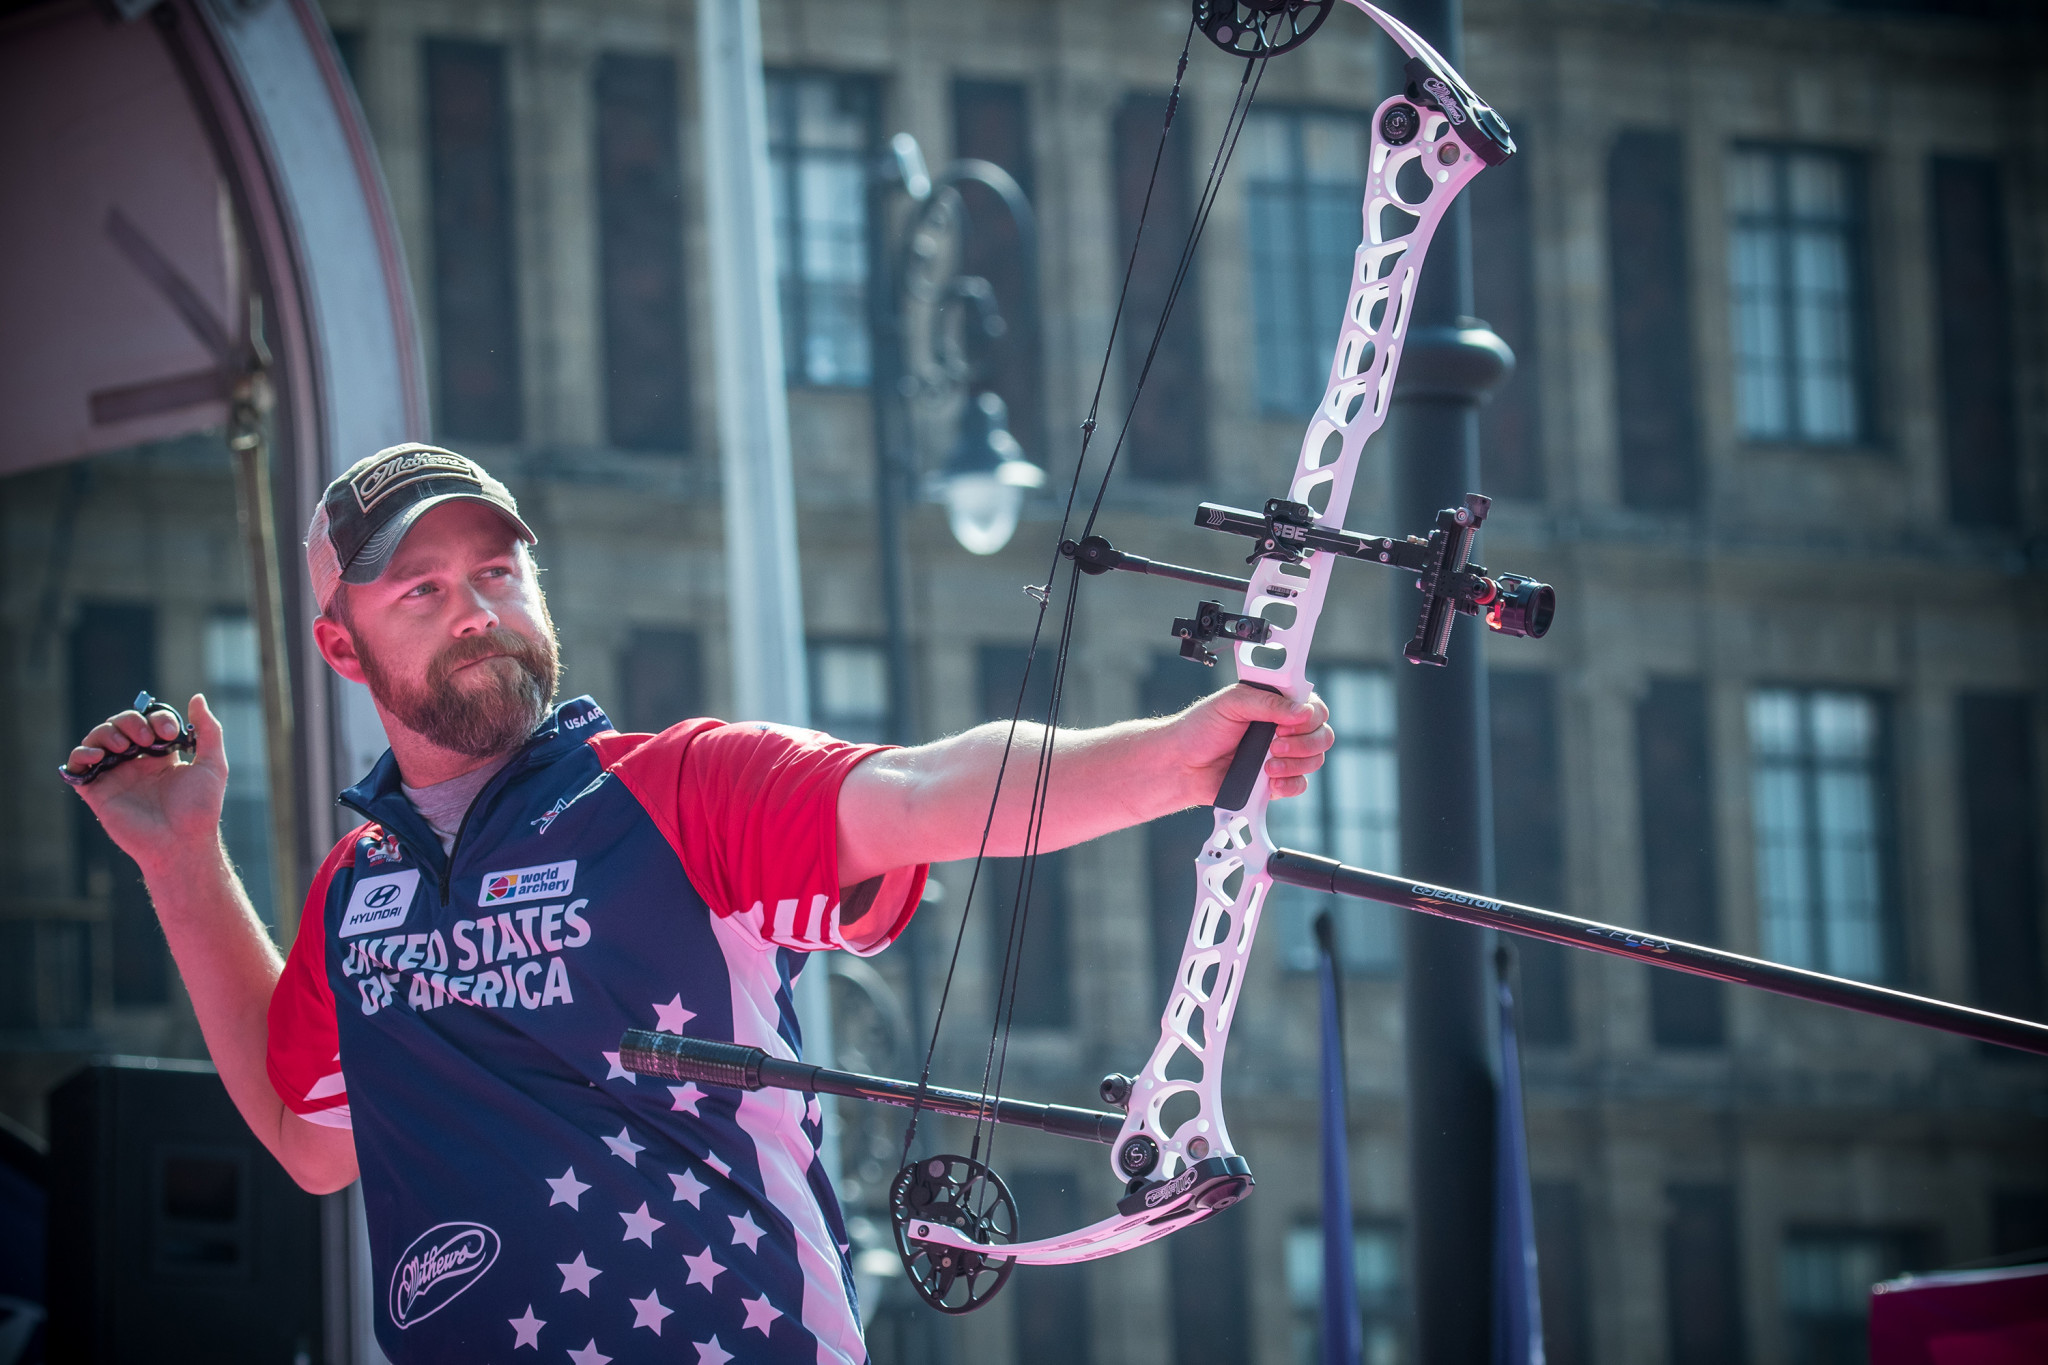 The United States Braden Gellenthien will be looking to extend his lead at the top of the World Cup leaderboard in the men's compound in Bangkok following his win in Marrakech last month ©Getty Images